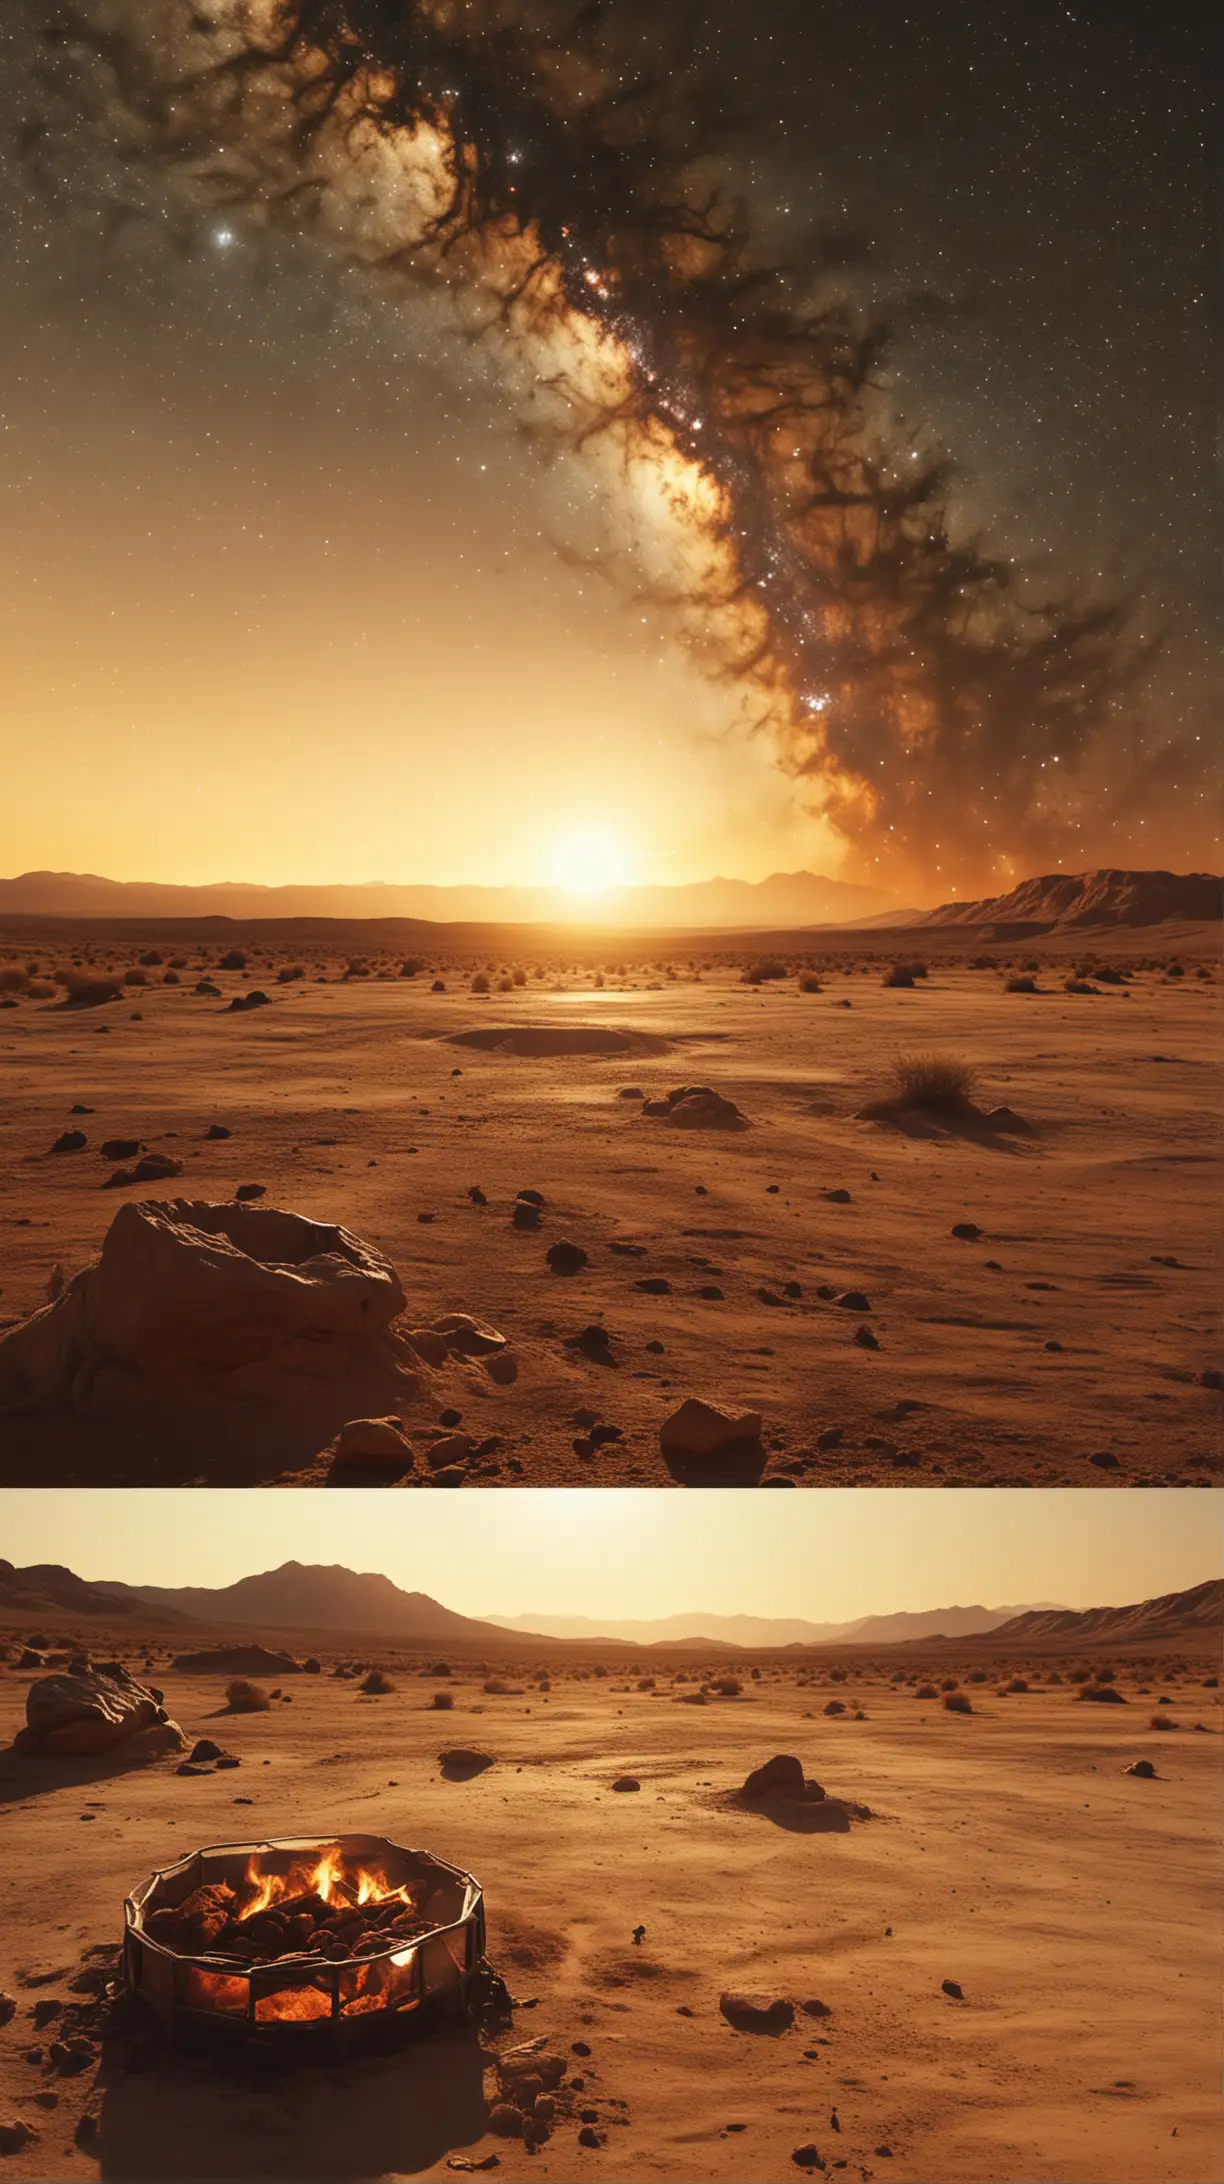 Double Exposure Cinematic Landscape with Desert Campfire and Distant Galaxy View